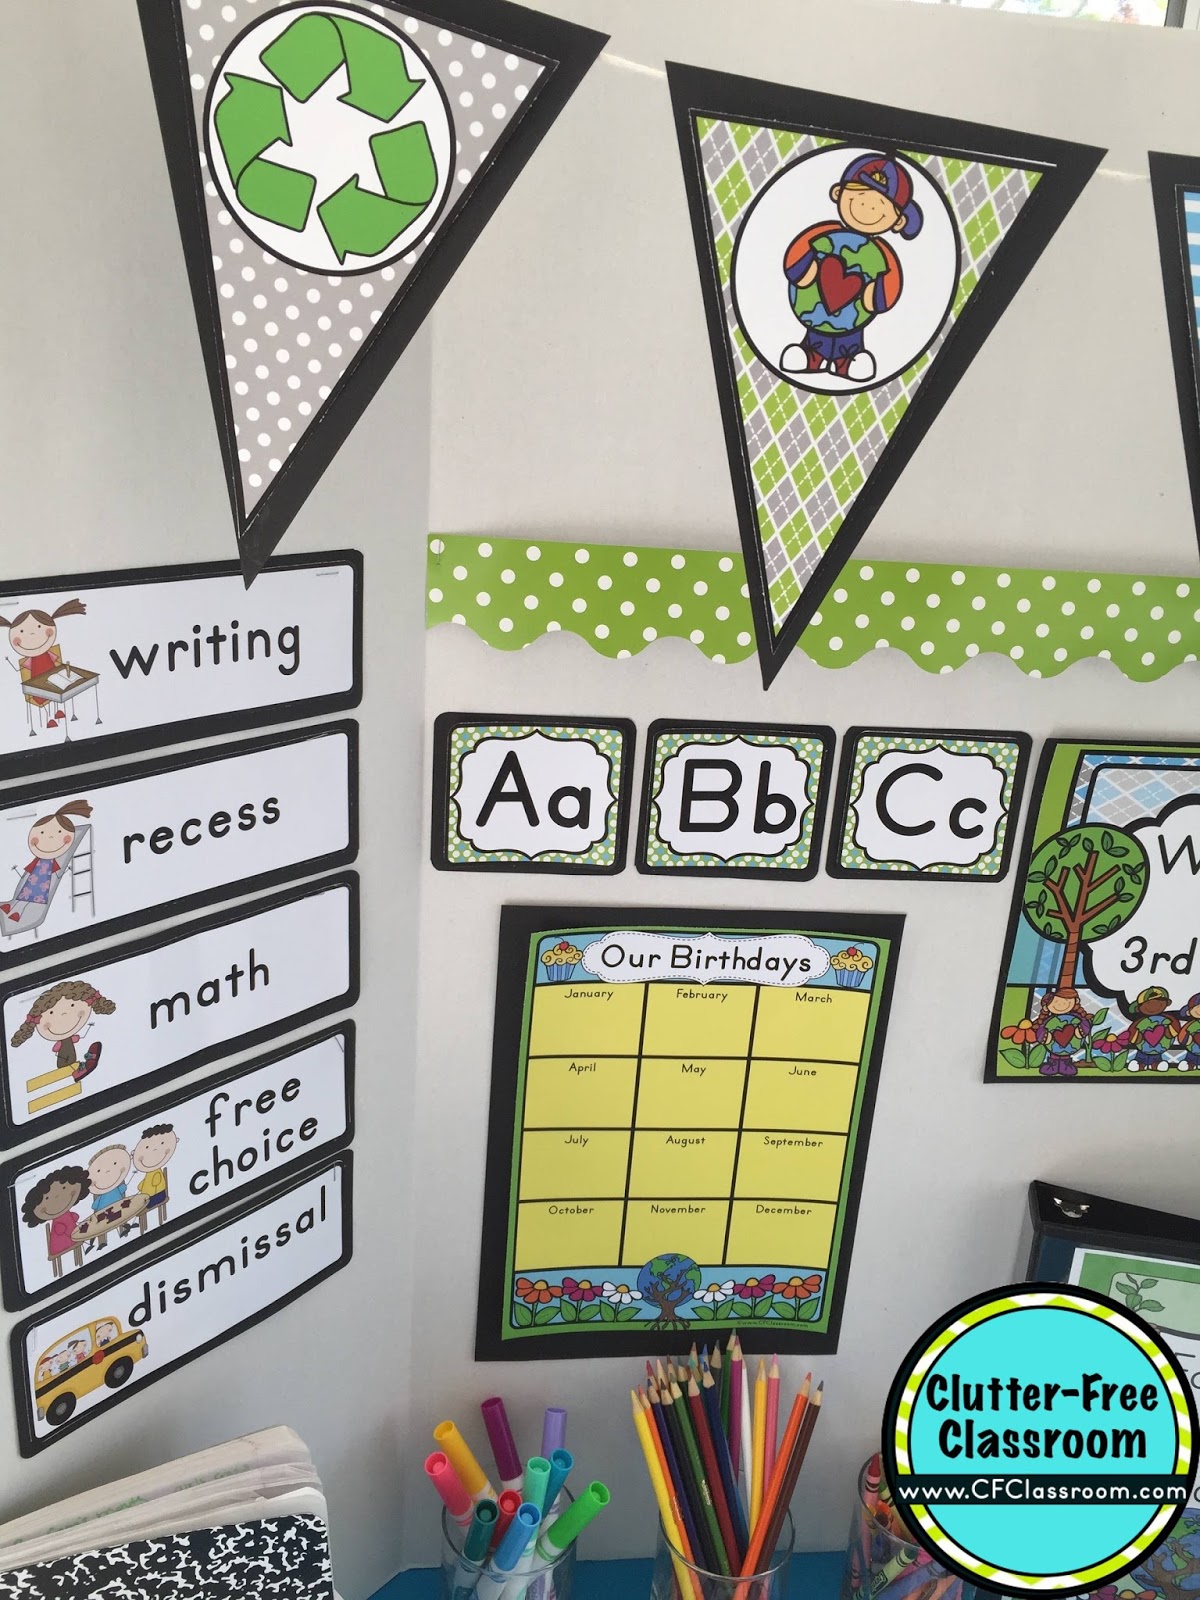 Are you planning a recycling themed classroom or thematic unit? This blog post provides great decoration tips and ideas for the best recycling theme yet! It has photos, ideas, supplies & printable classroom decor to will make set up easy and affordable. You can create a recycling theme on a budget!